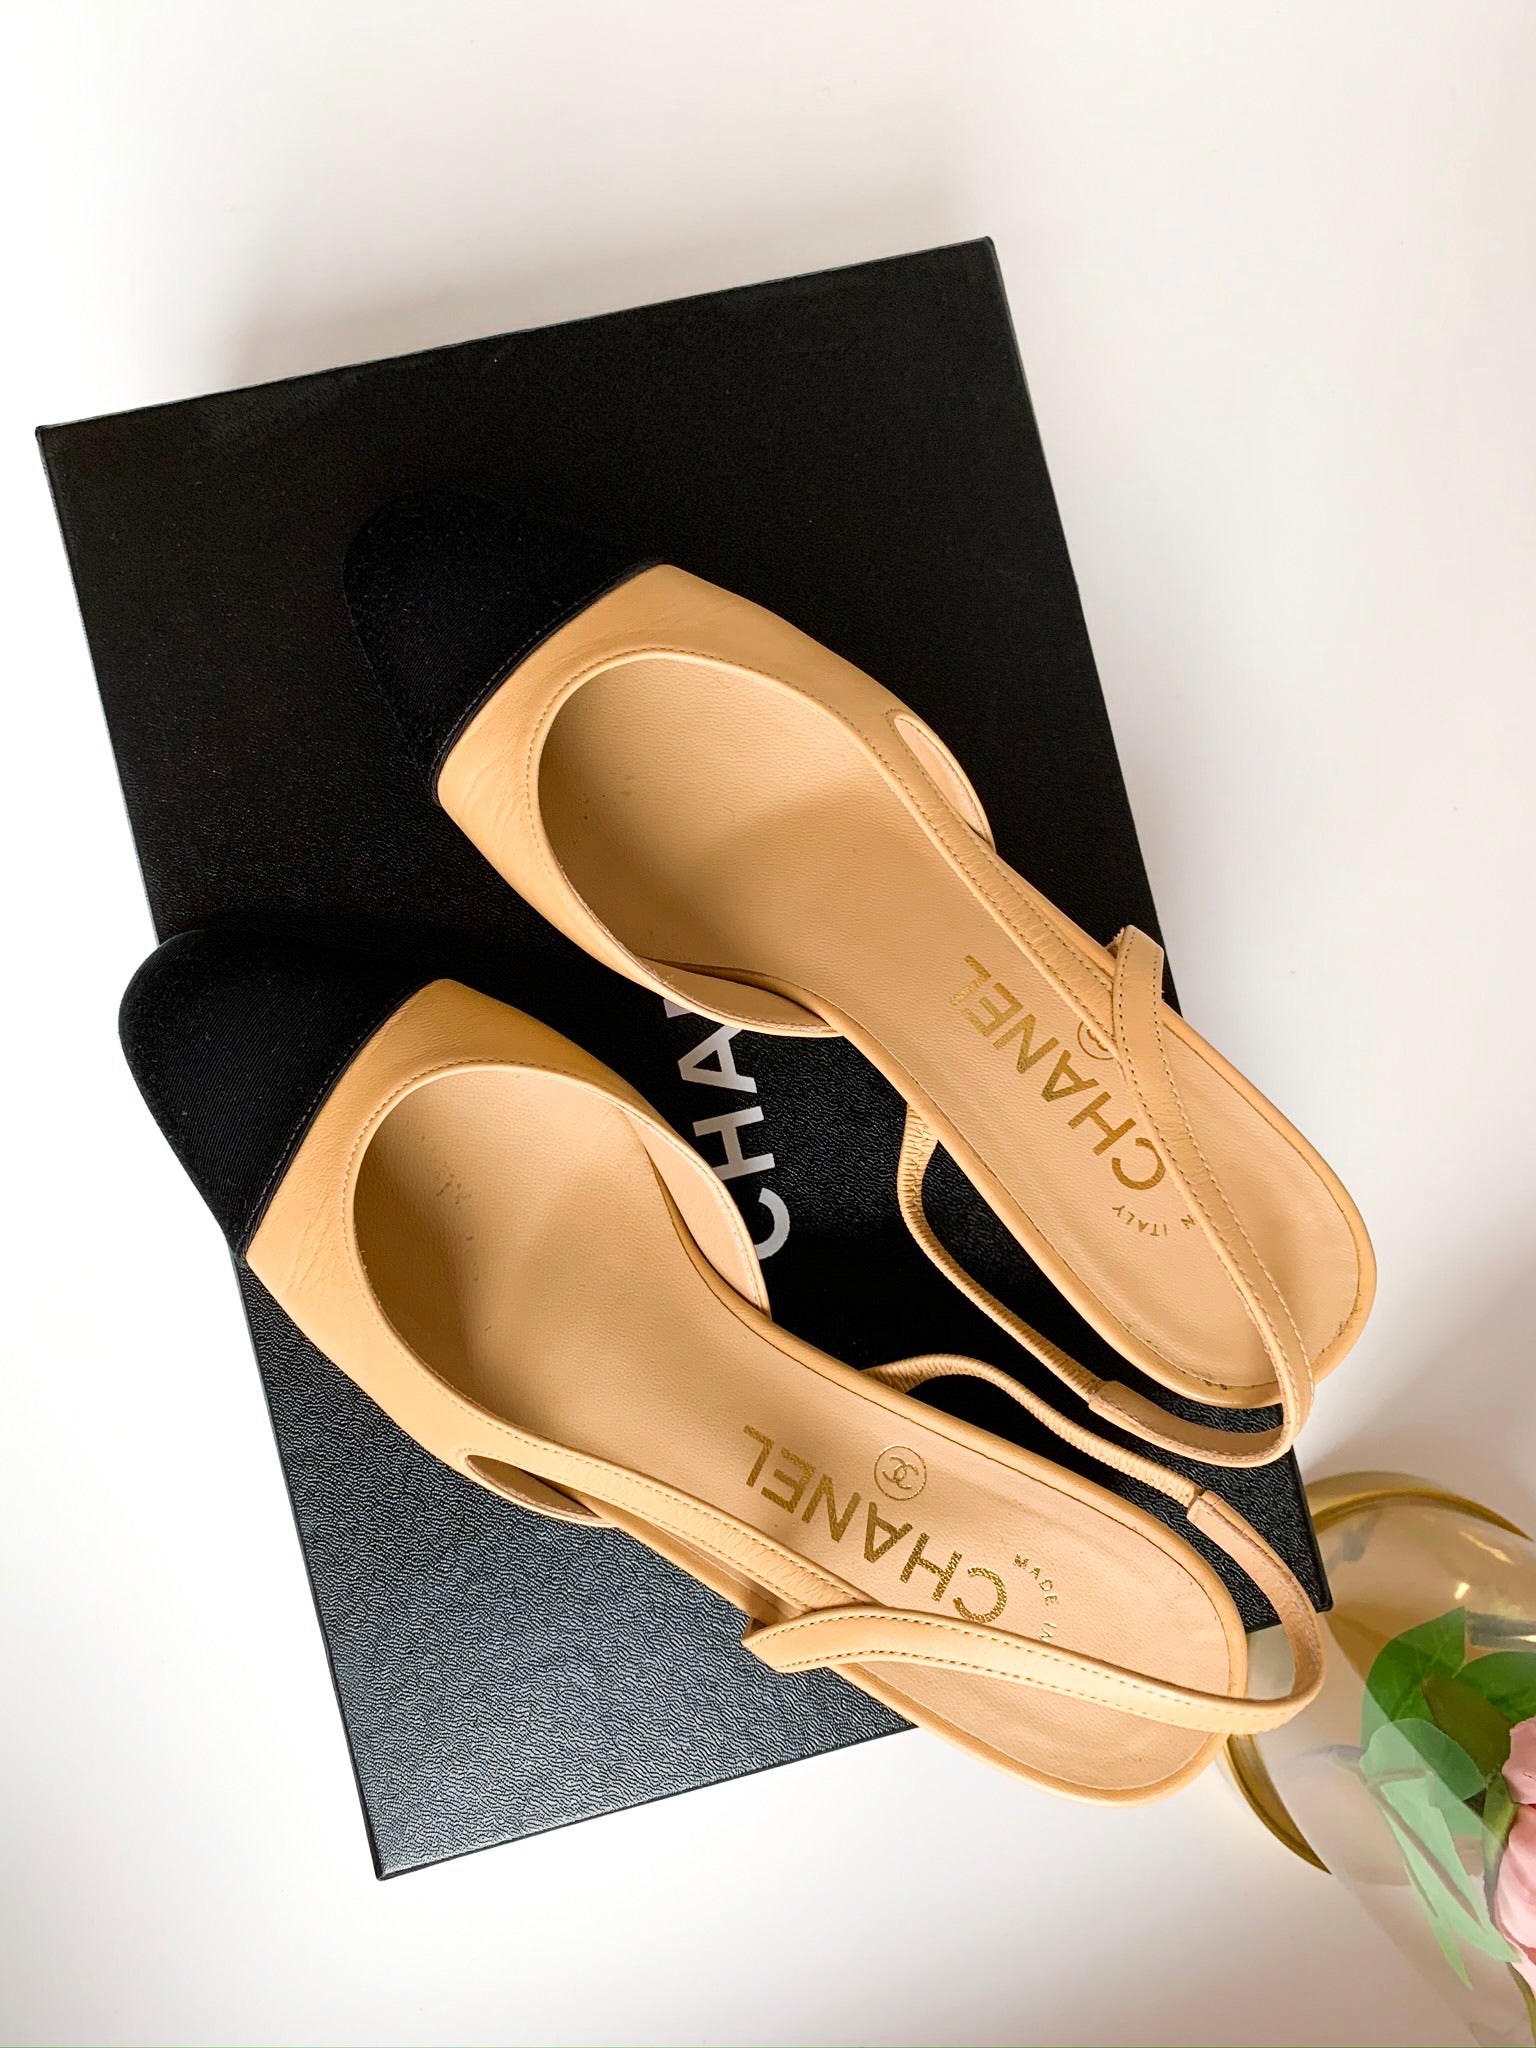 Sold at Auction: Chanel, Chanel Classic Ballerina Flats & Sling